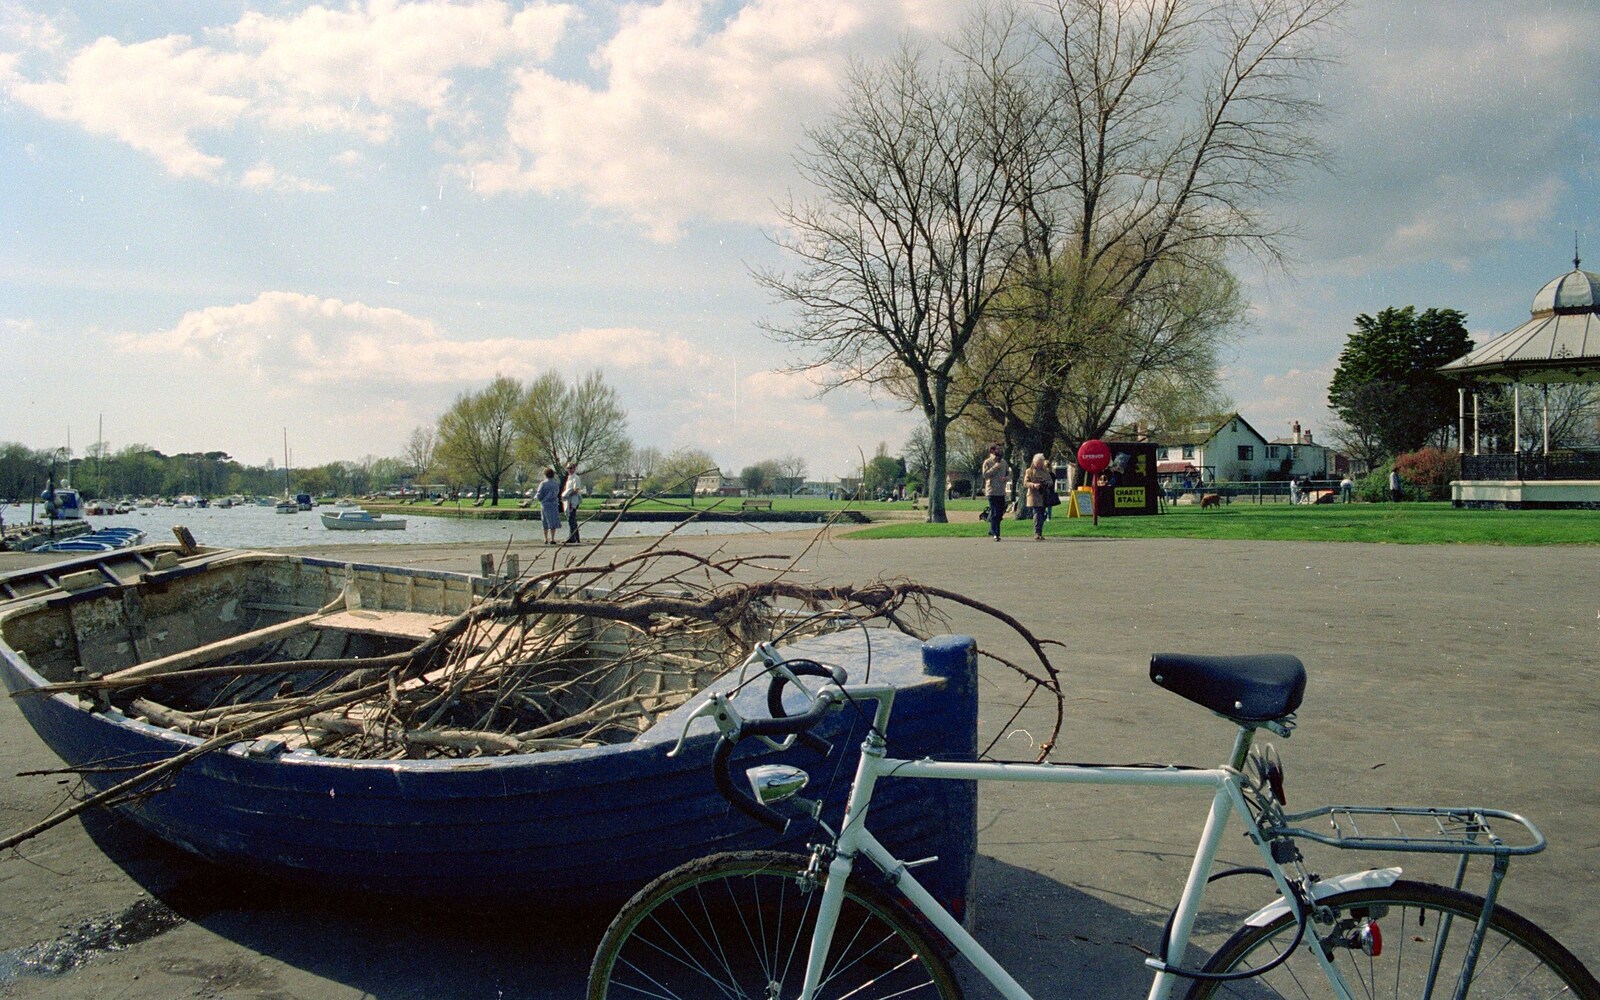 The Vineyard, Christchurch and Pizza, New Milton and the New Forest - 2nd April 1989: Nosher's bike, a boat and the bandstand at Christchurch Quay